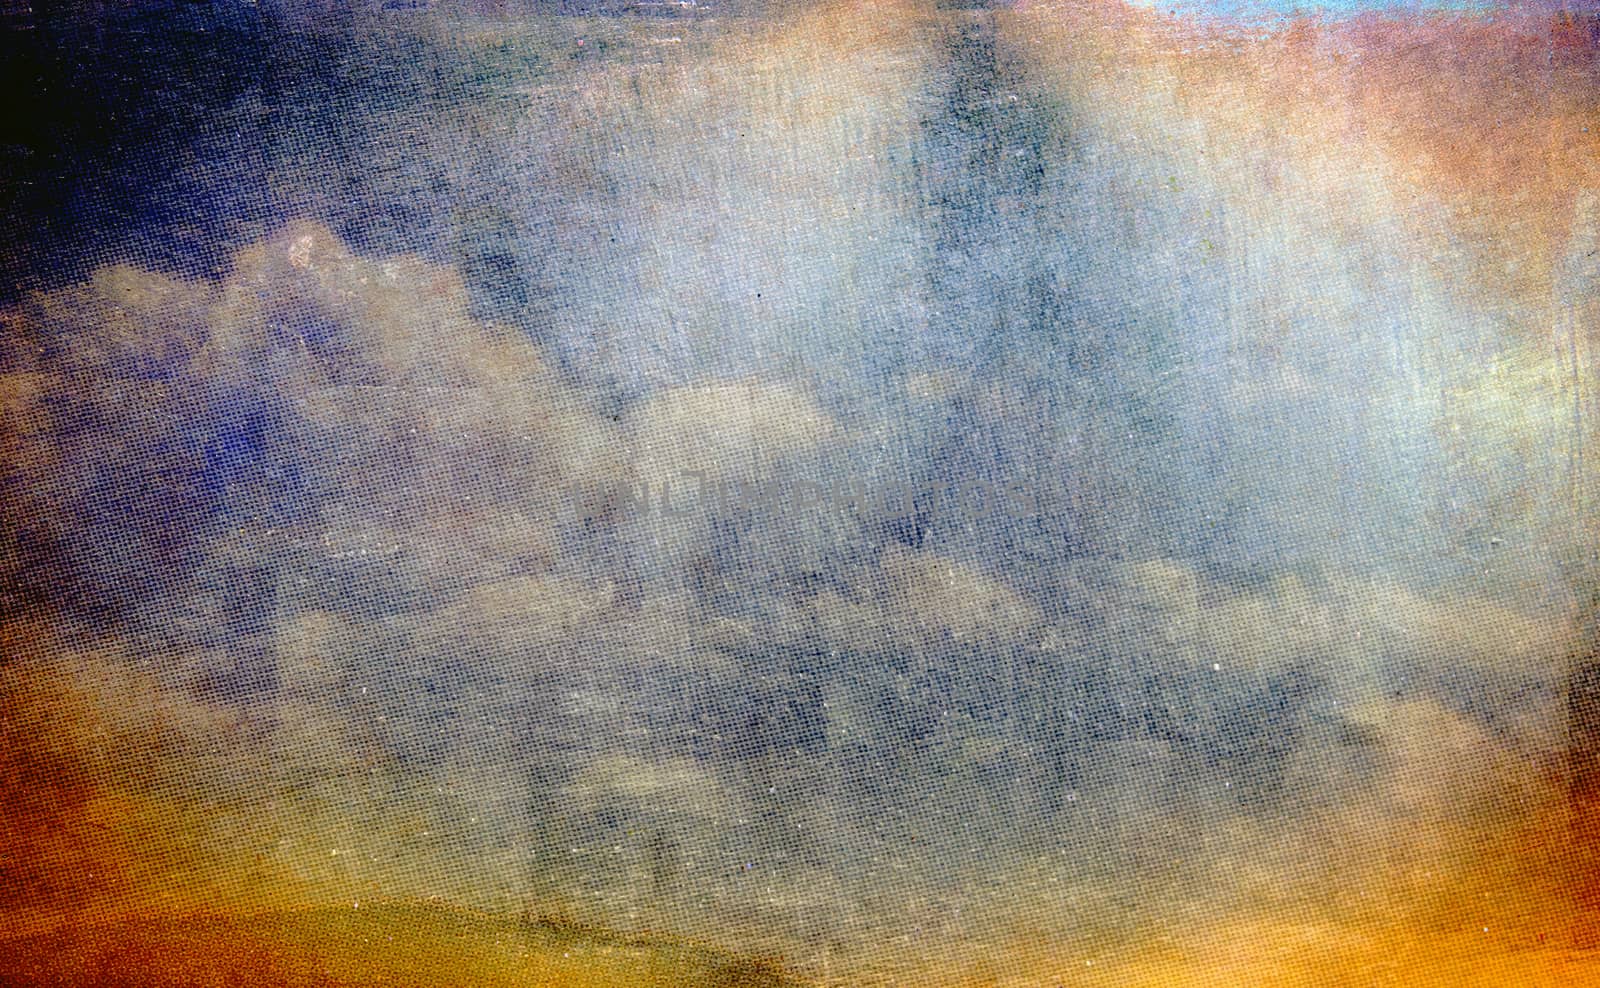 grunge sky texture( old post card dots )